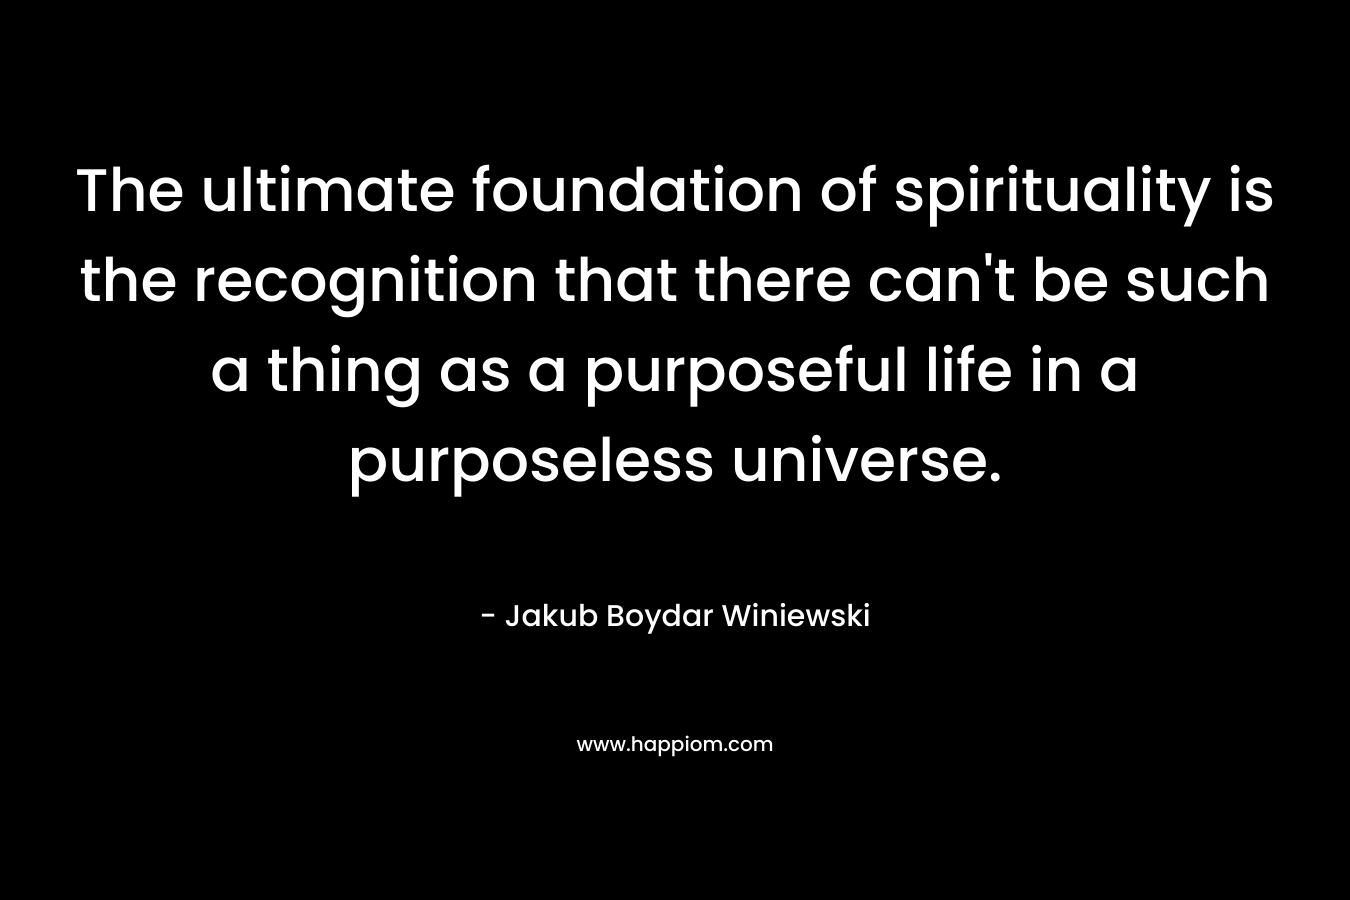 The ultimate foundation of spirituality is the recognition that there can't be such a thing as a purposeful life in a purposeless universe.